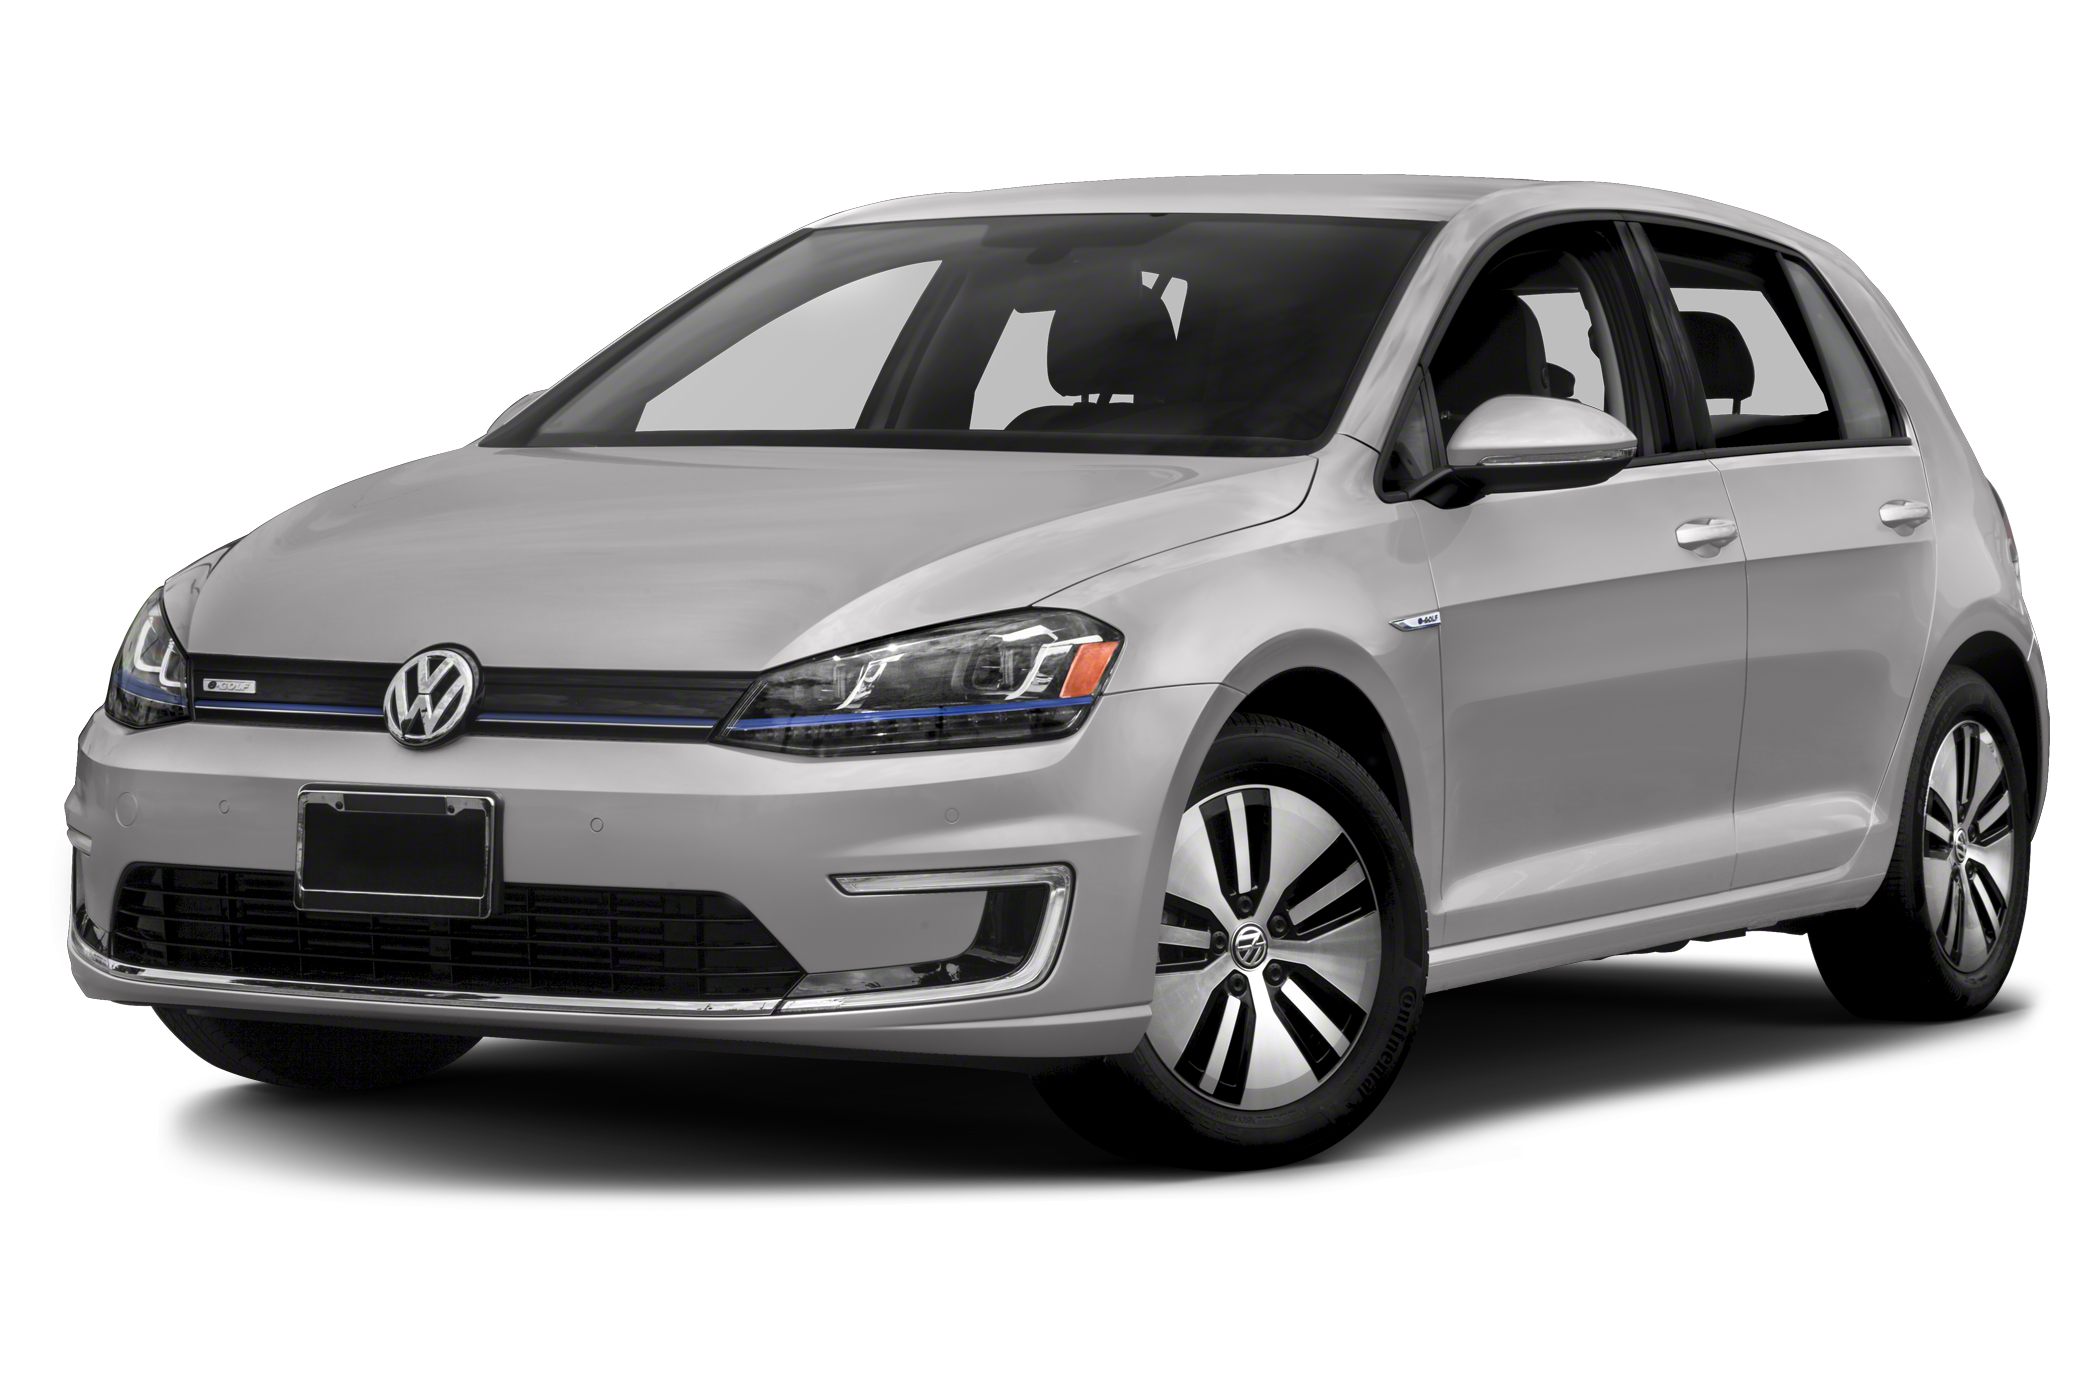 2016 Volkswagen E-Golf oem parts and accessories on sale